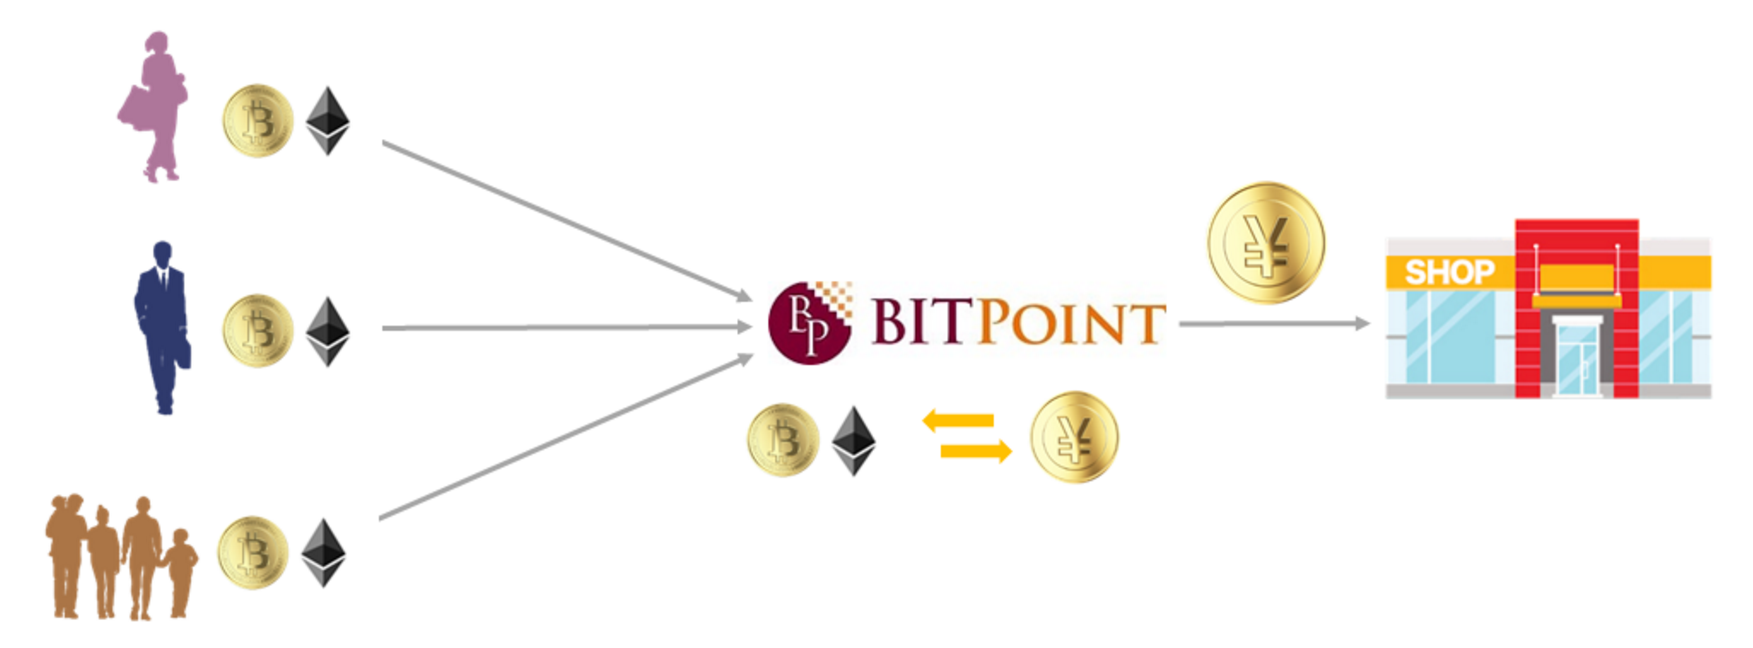 Bitpoint Adds Bitcoin and Ether Payments to Platform with Unionpay, Wechat Pay and Alipay